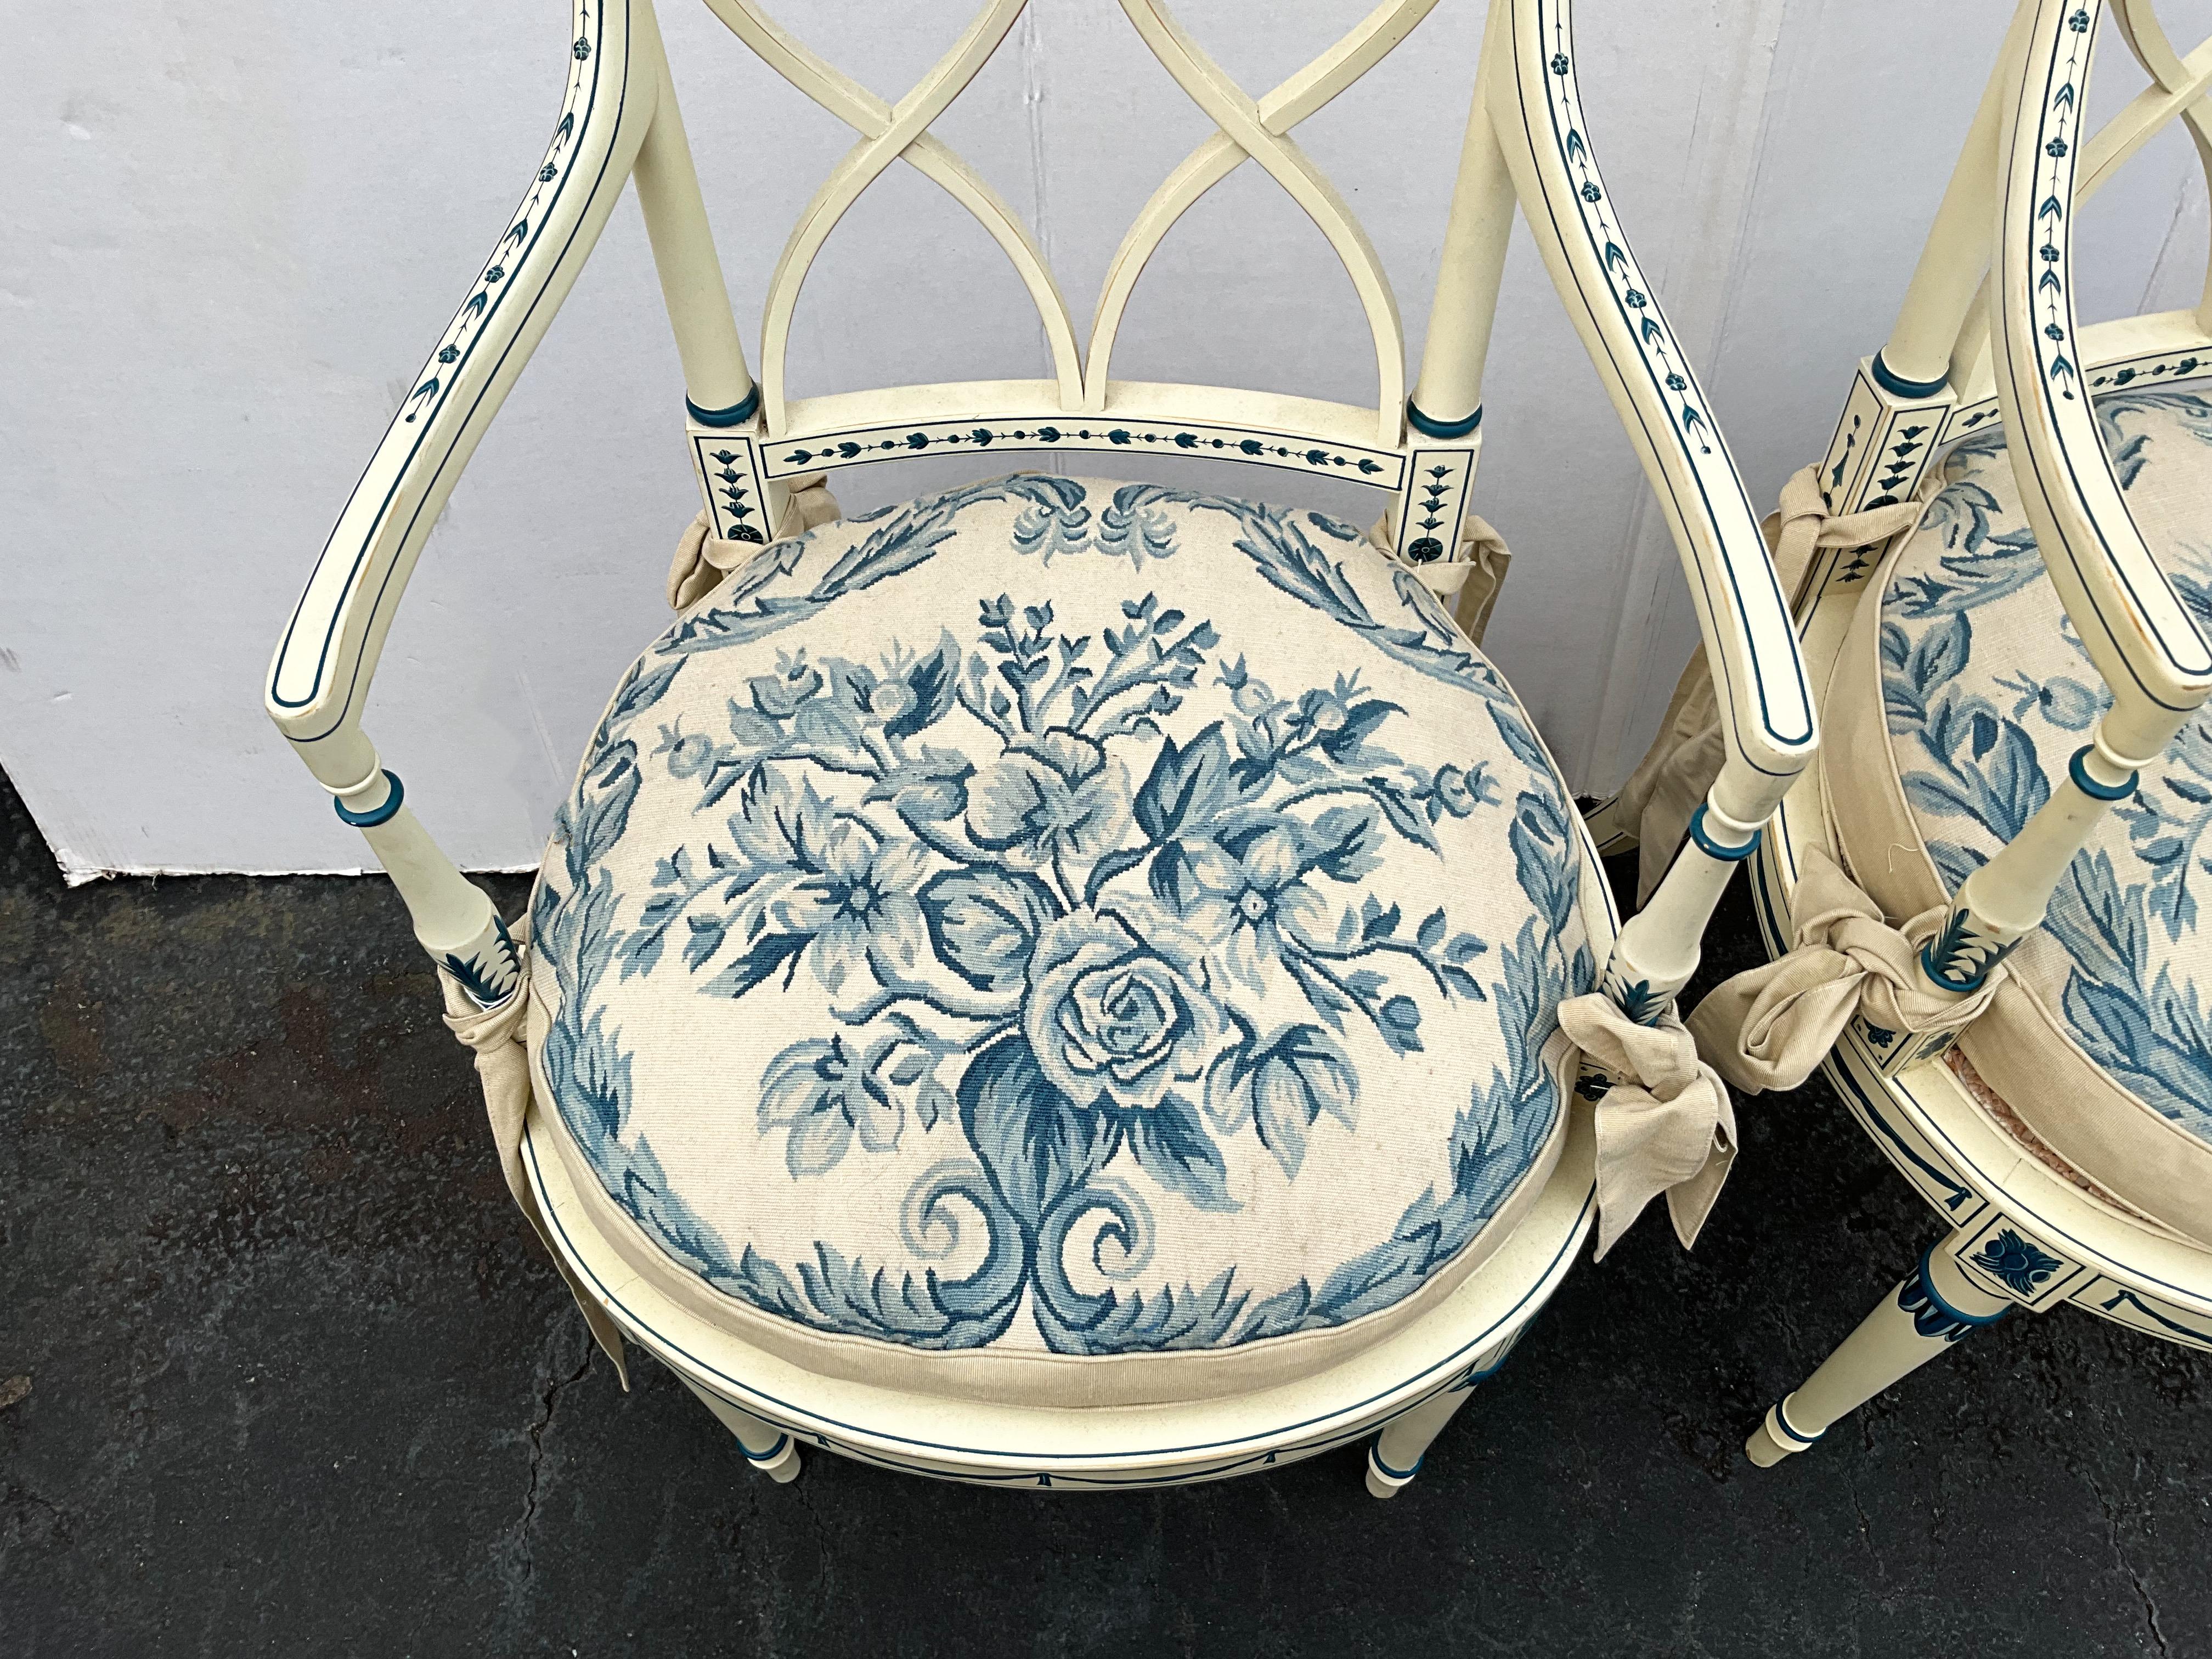 These are my new favorite chairs…until the next favorite. Smiles. This is a pair of Adam style hand painted Bergere chairs with beautiful needlepoint cushions. The interior is down. The caning is in very good condition. They are ivory with blue